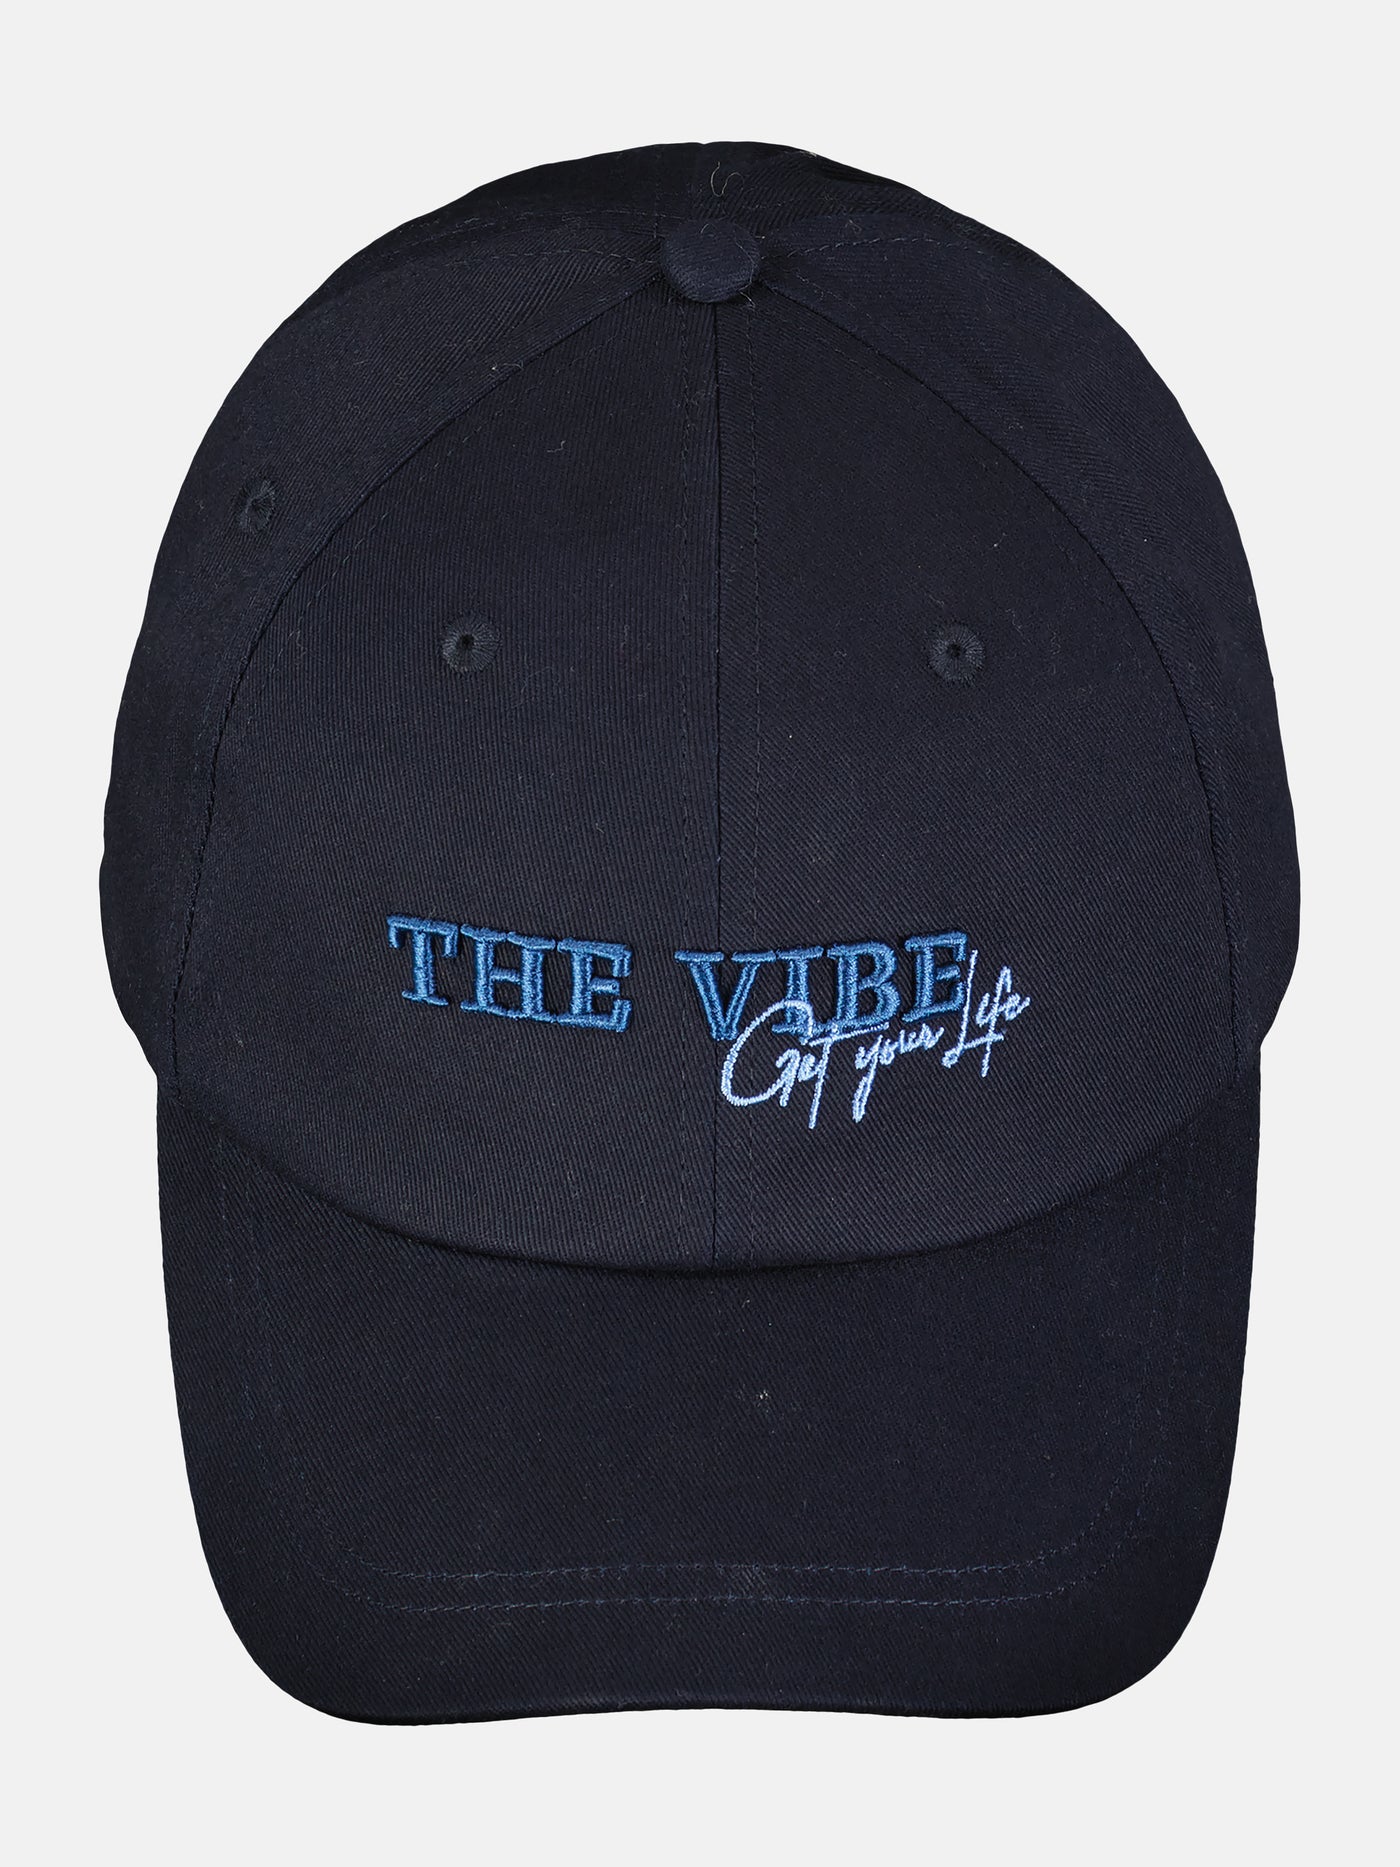 Baseball cap, plain with front embroidery